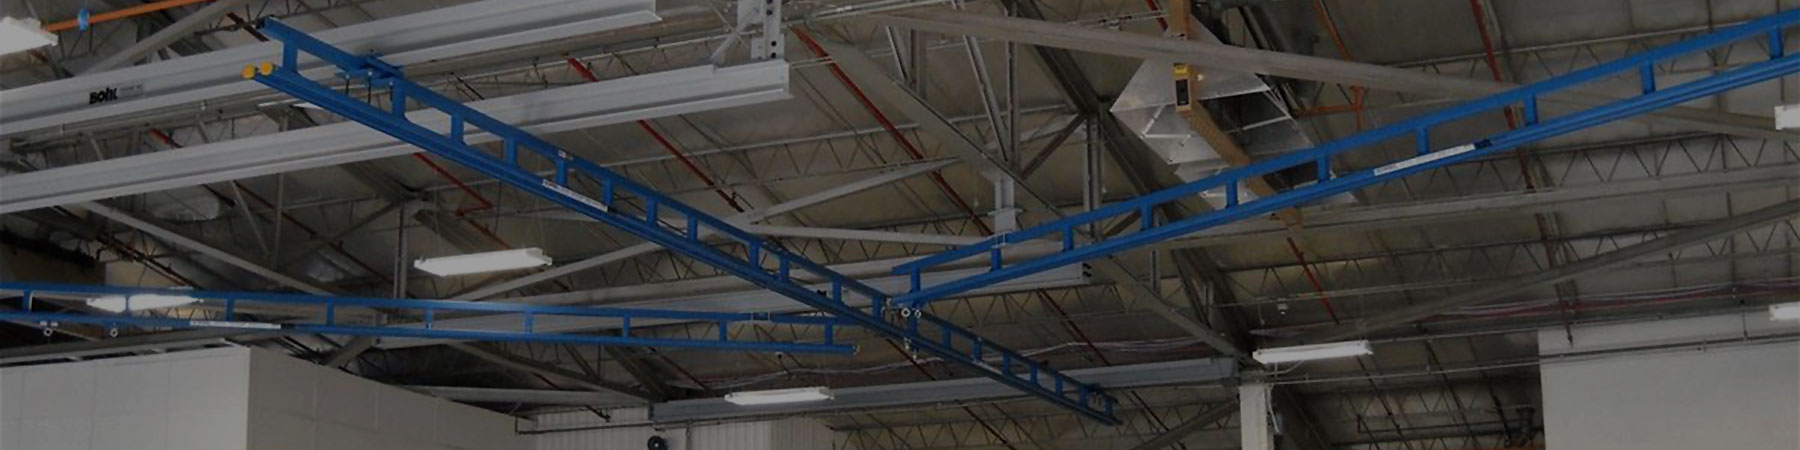 Ceiling Mounted Fall Protection Monorails